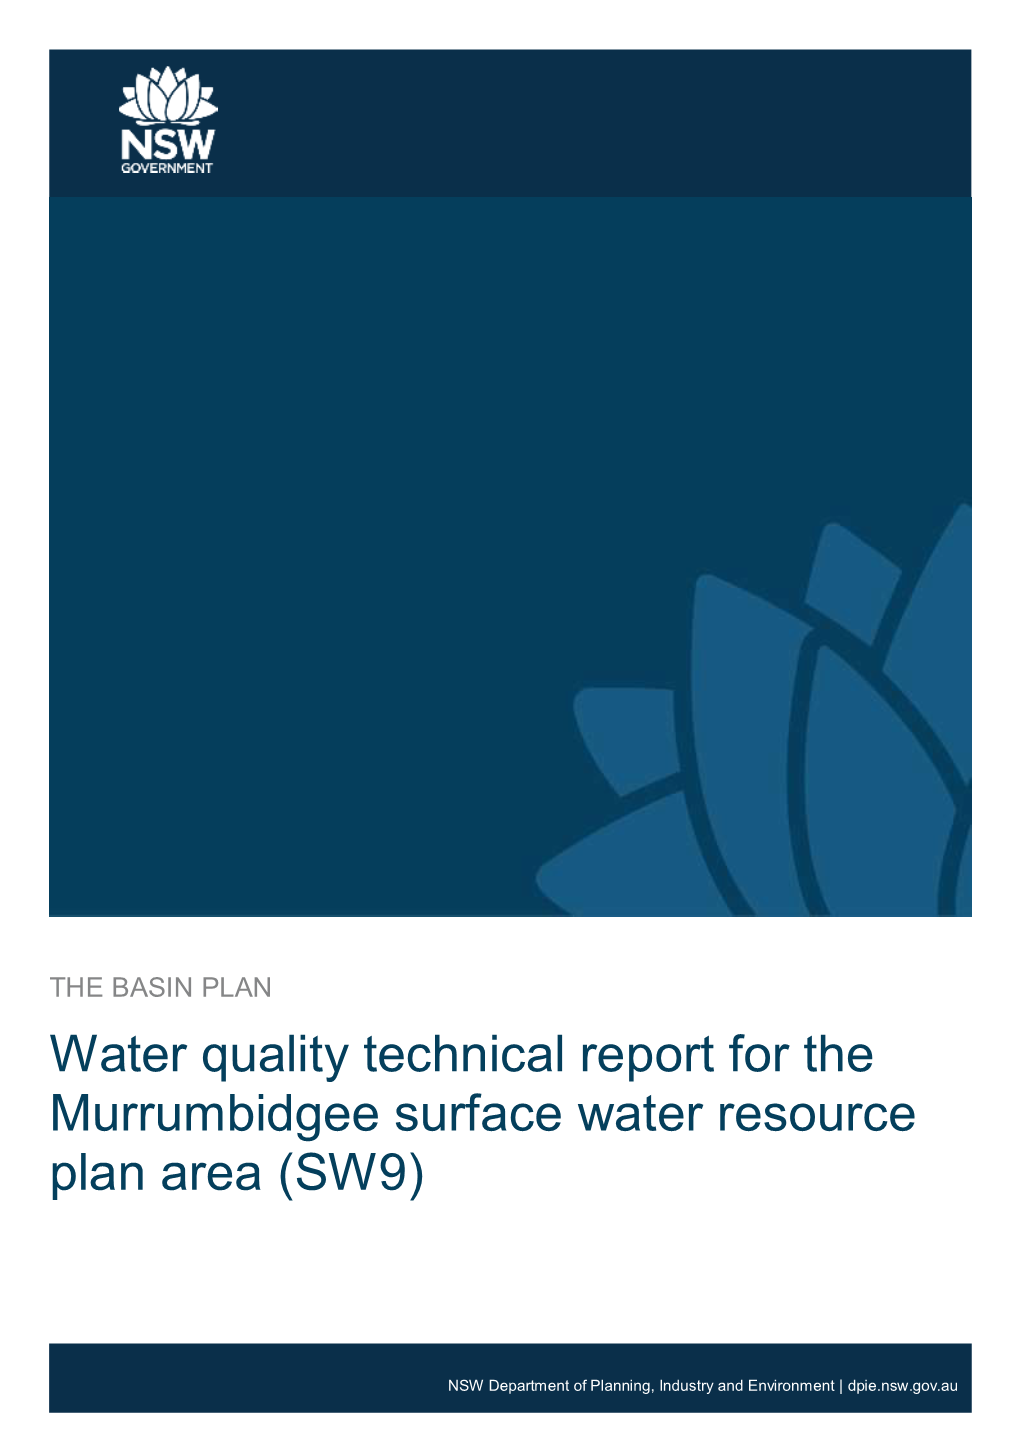 Water Quality Technical Report for the Murrumbidgee Surface Water Resource Plan Area (SW9)